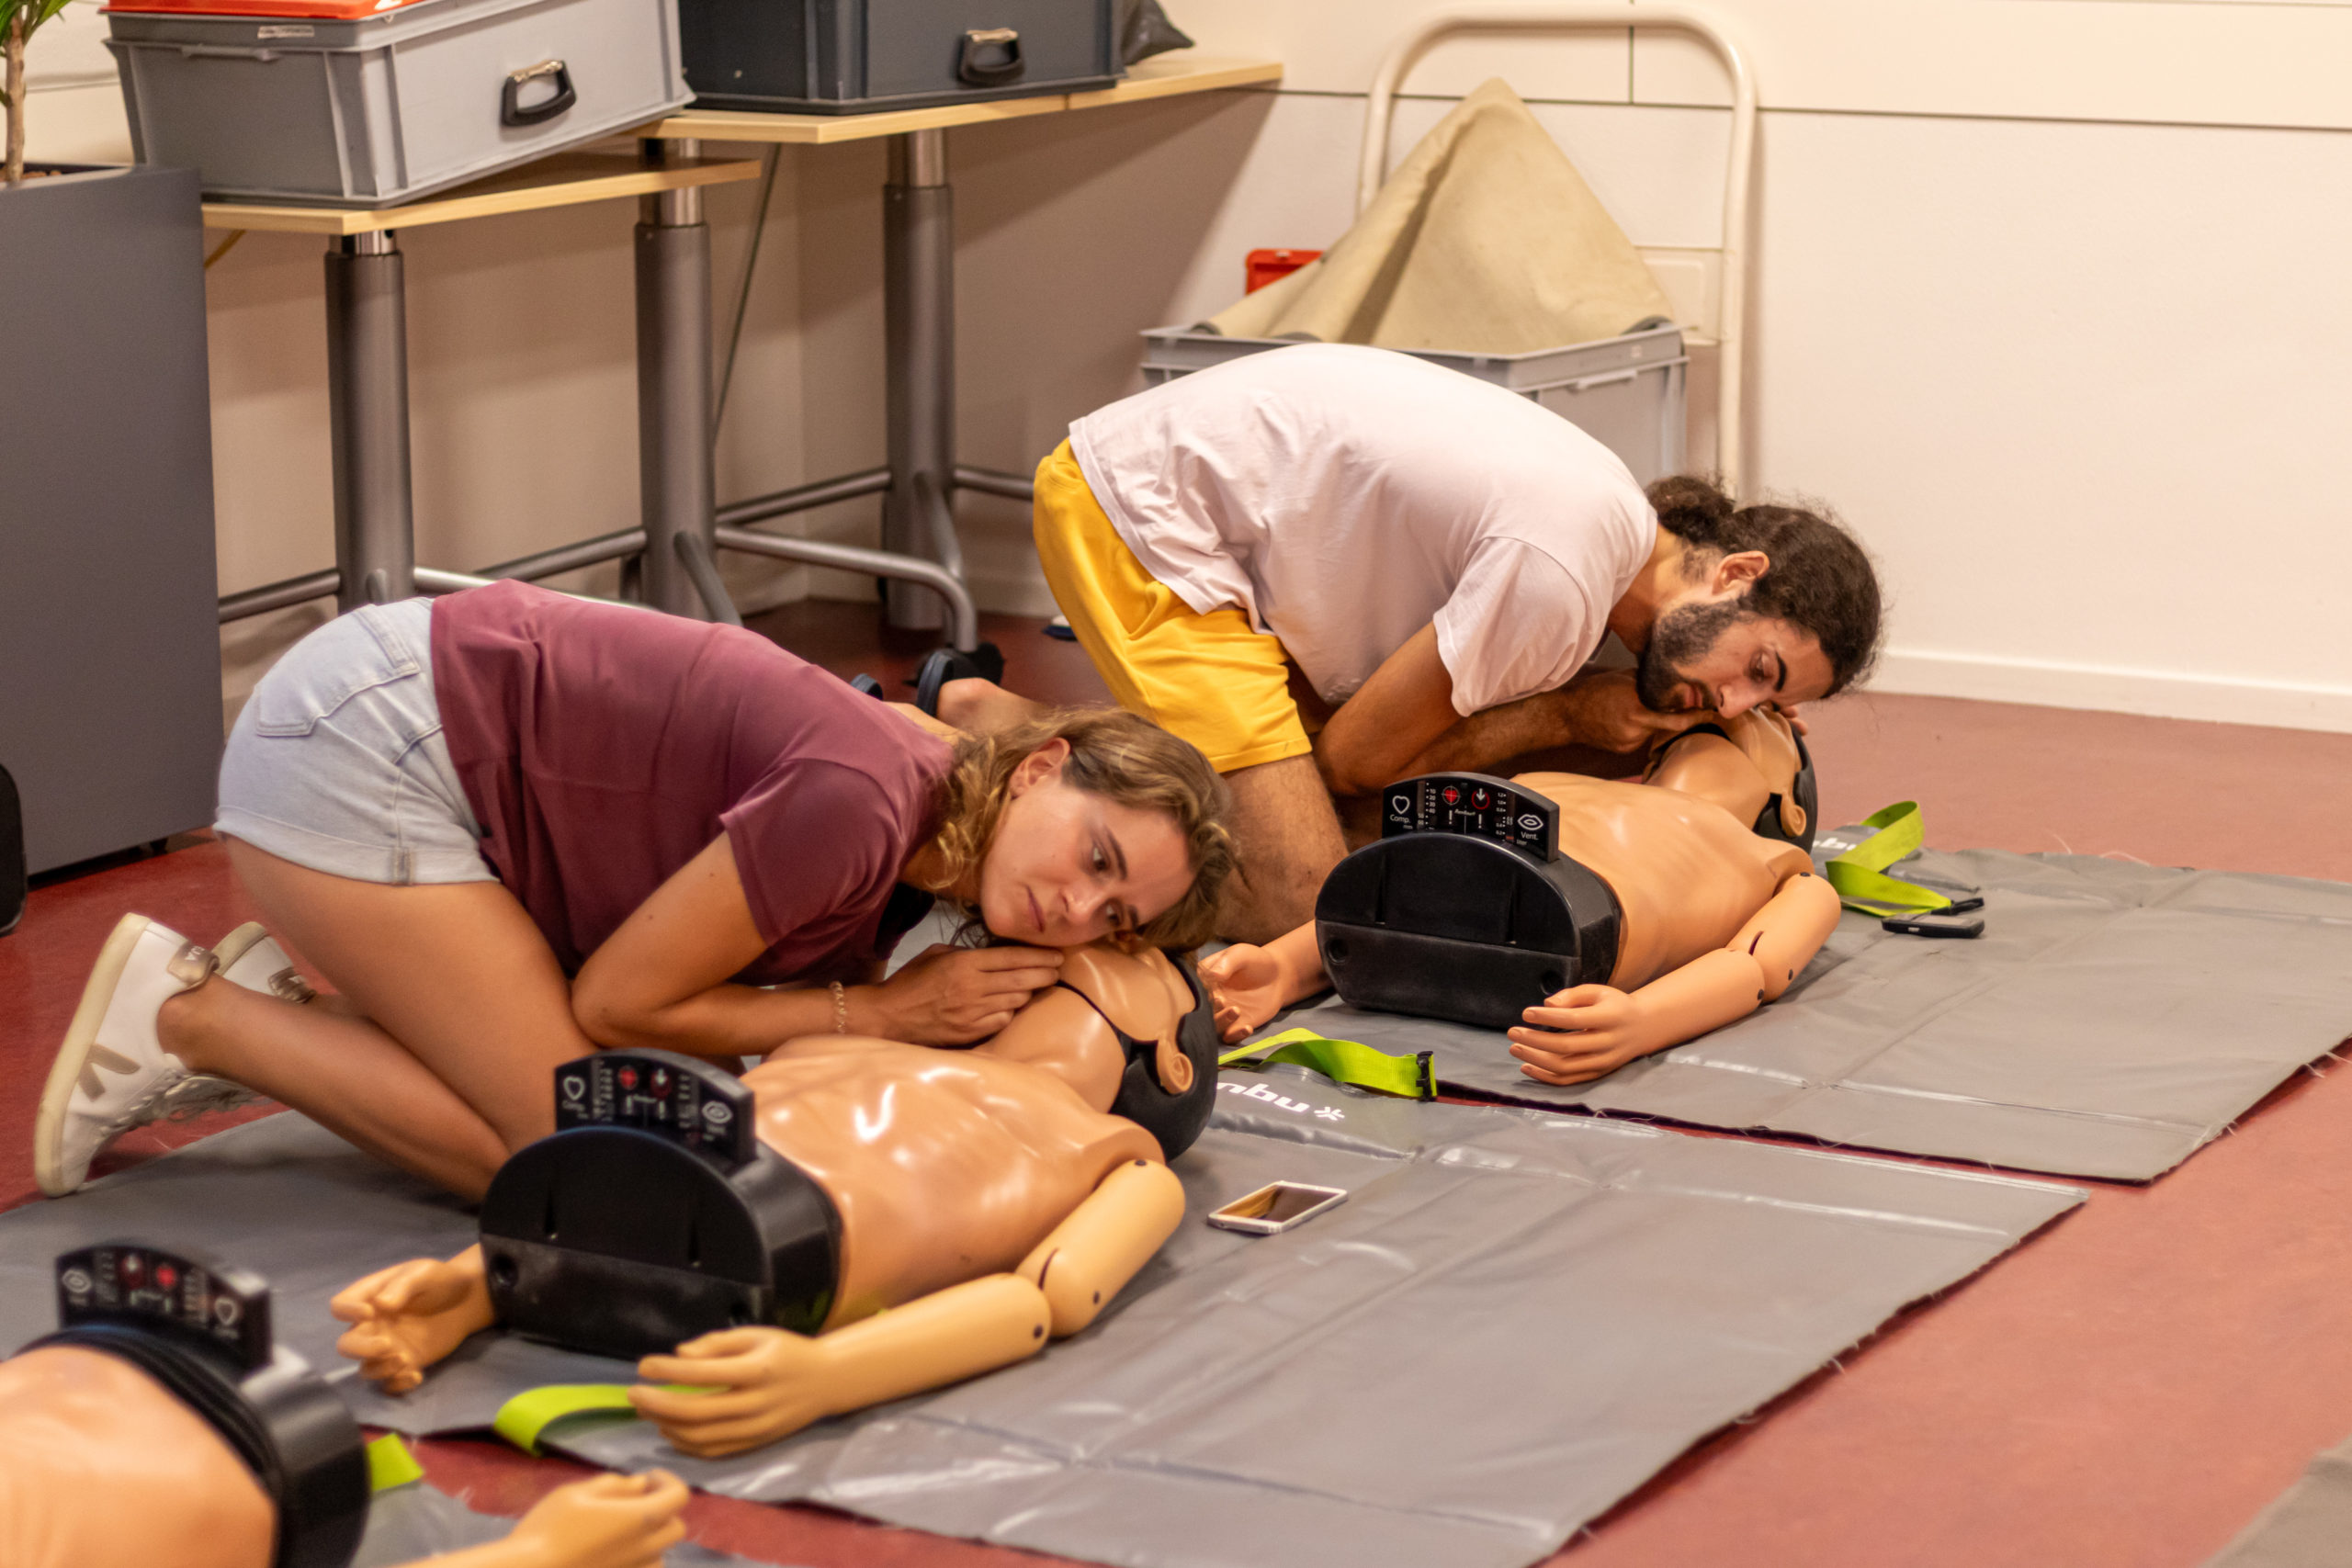 CPR course for student-athletes started